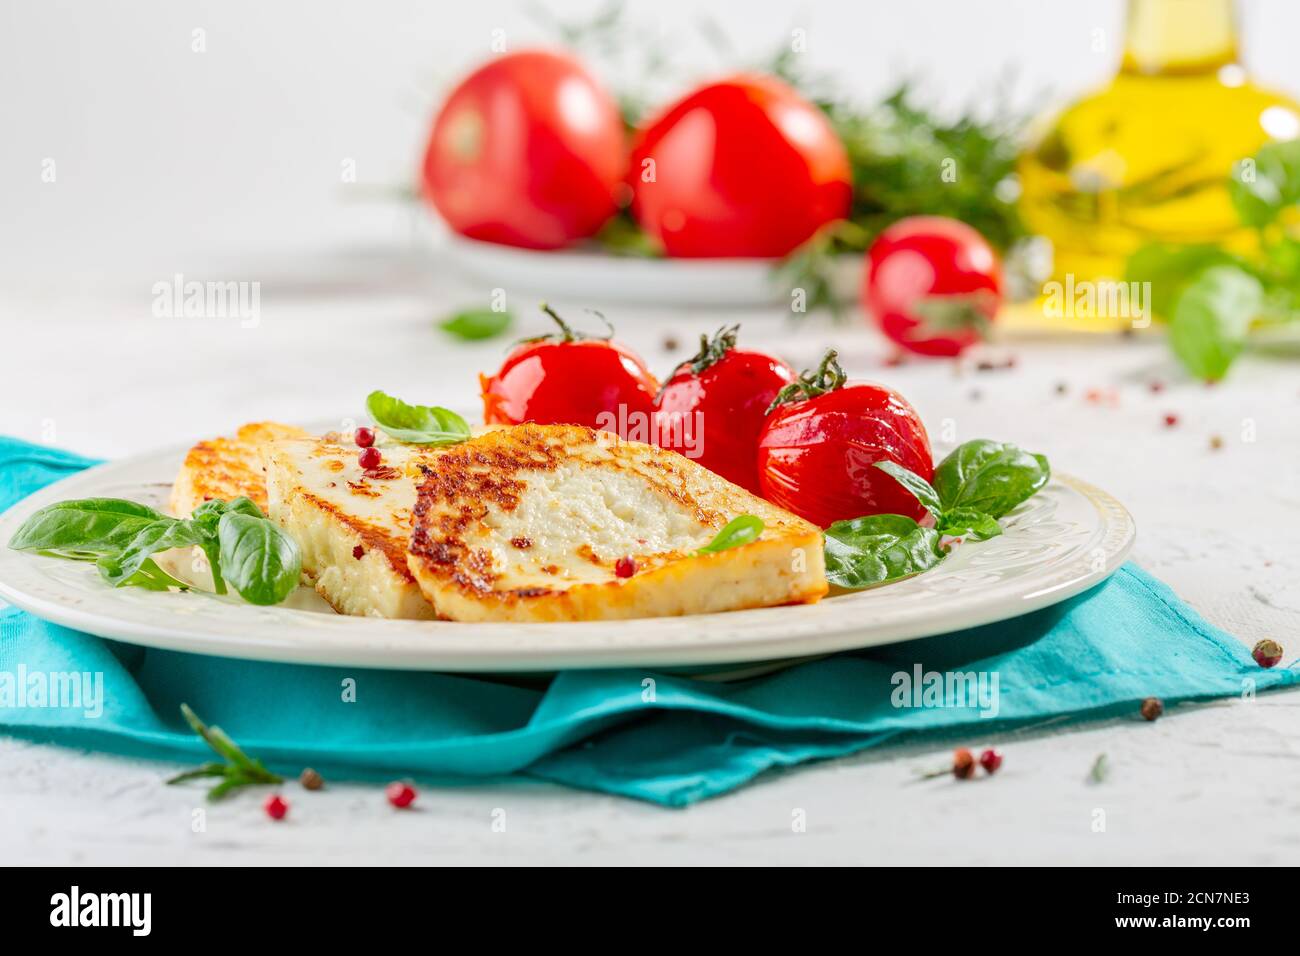 Grilled homemade halloumi cheese. Stock Photo